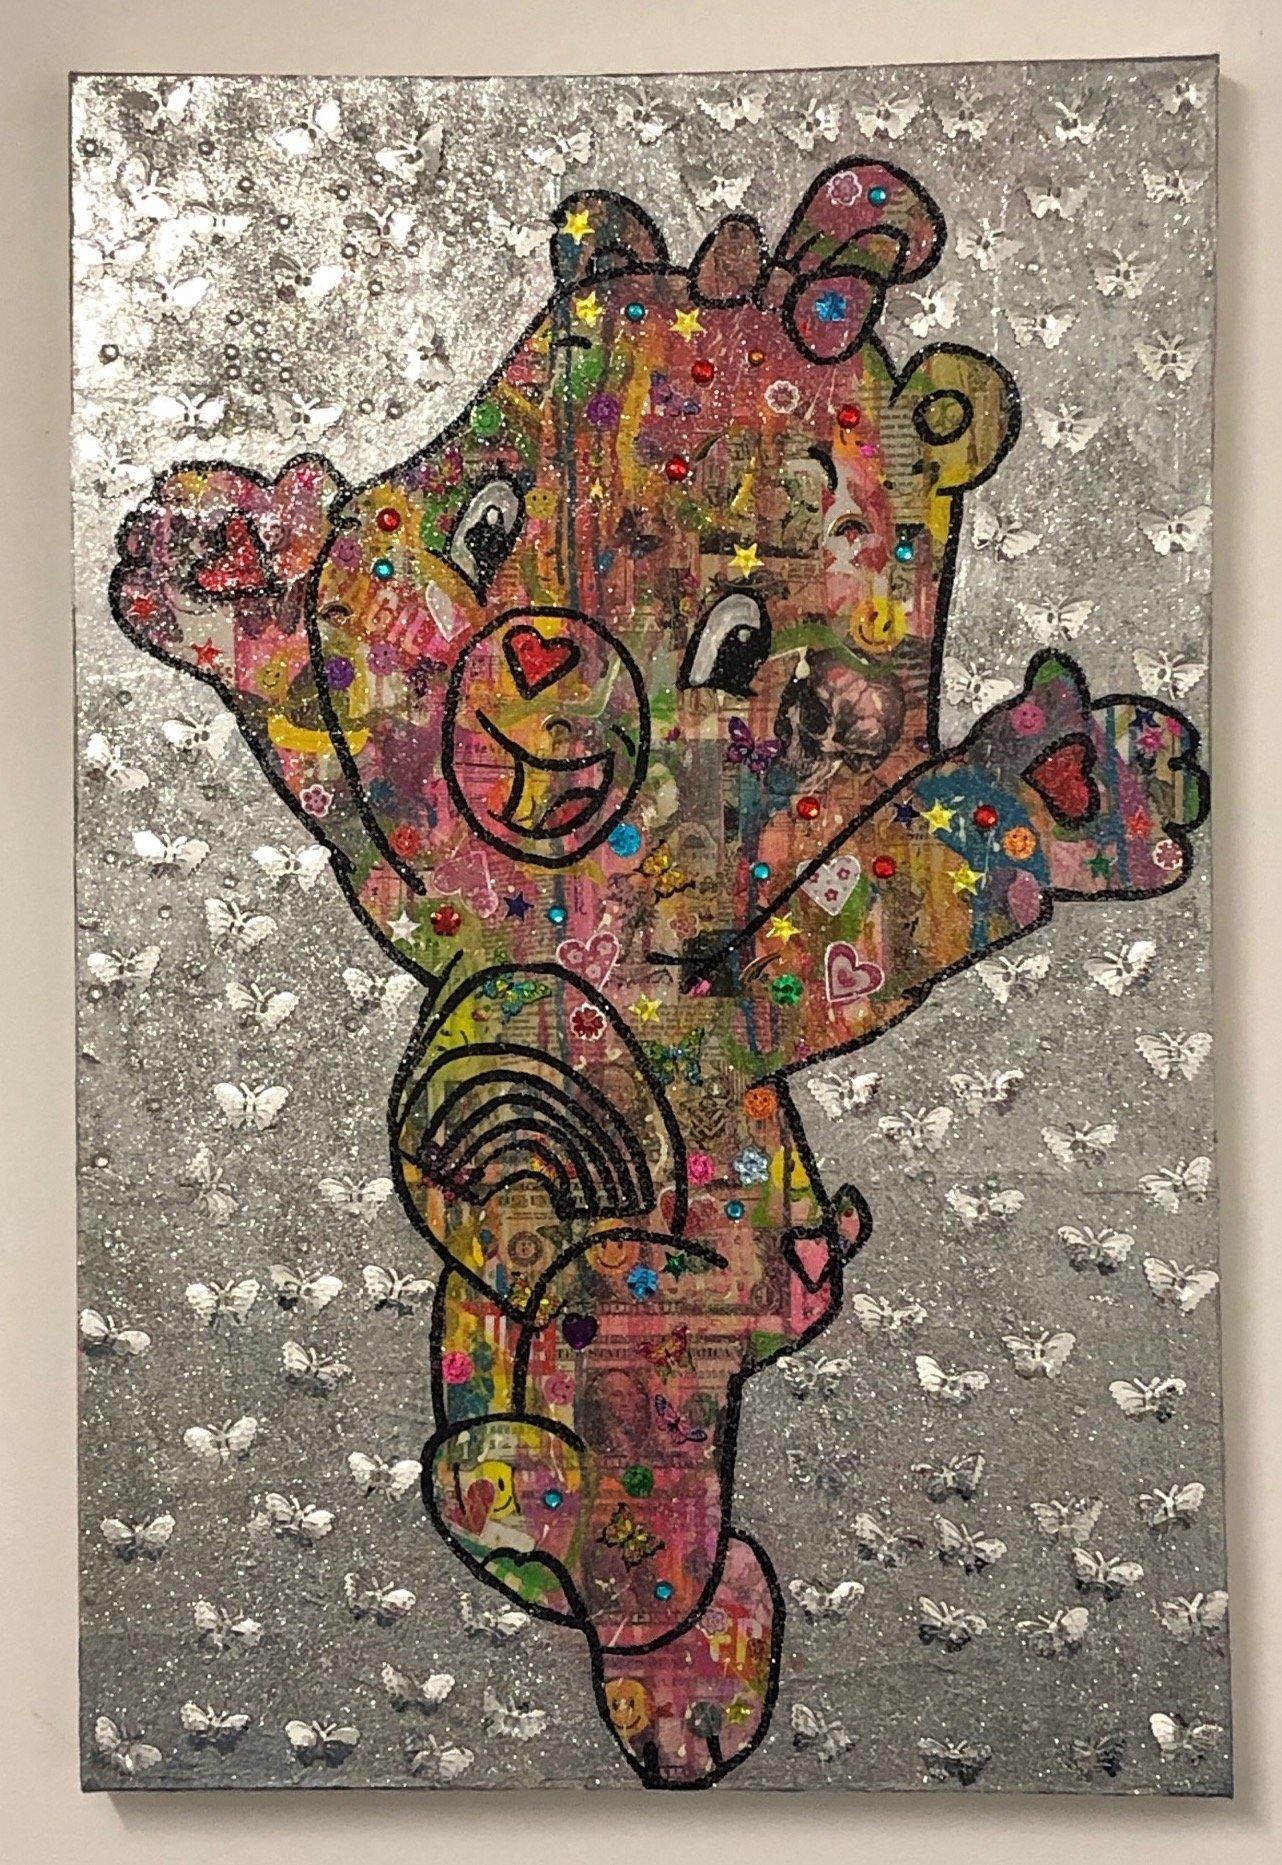 I Care because you do by Barrie J Davies 2018, mixed media on canvas, Unframed, 50cm x 75cm. Barrie J Davies is an Artist - Pop Art and Street art inspired Artist based in Brighton England UK - Pop Art Paintings, Street Art Prints & Editions available.